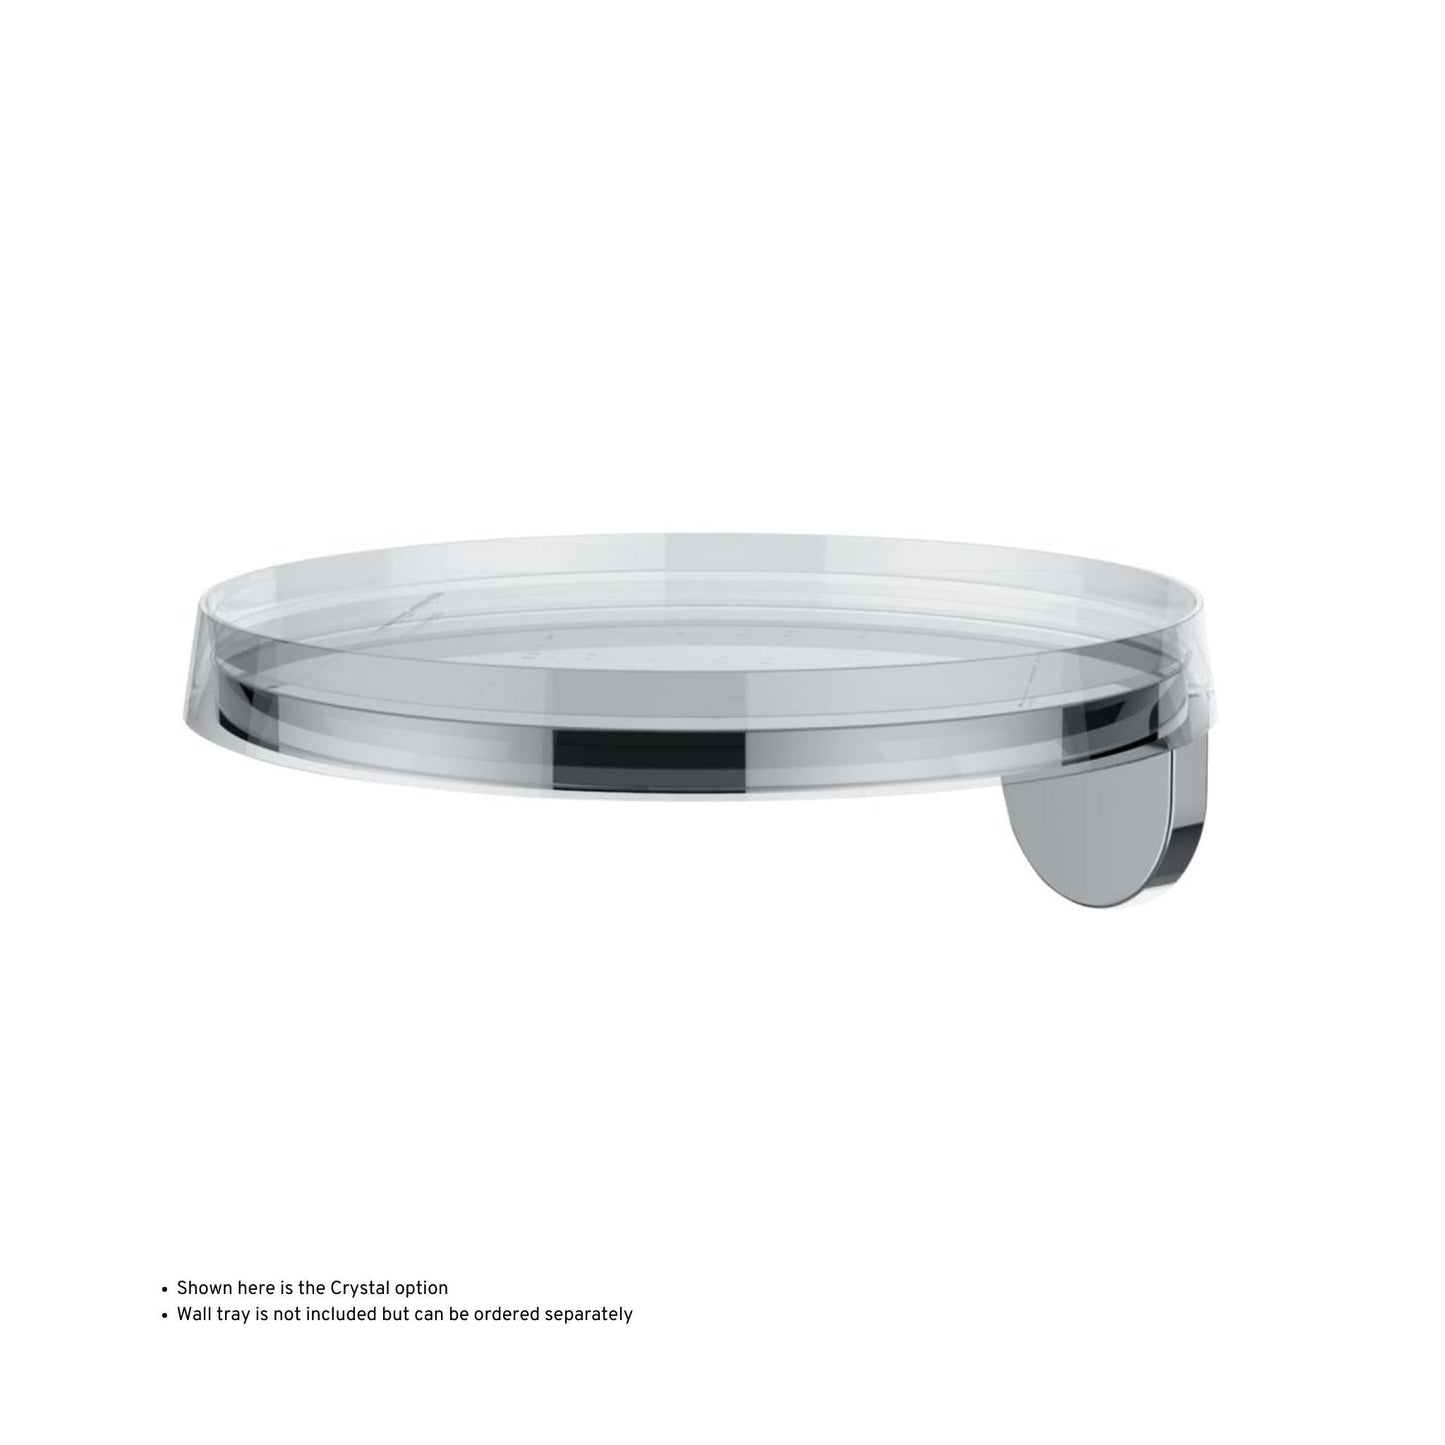 Laufen Kartell 7" Opaque White Disc Tray for Toilet Paper Holders, Faucets, and Wall-Mounted Trays